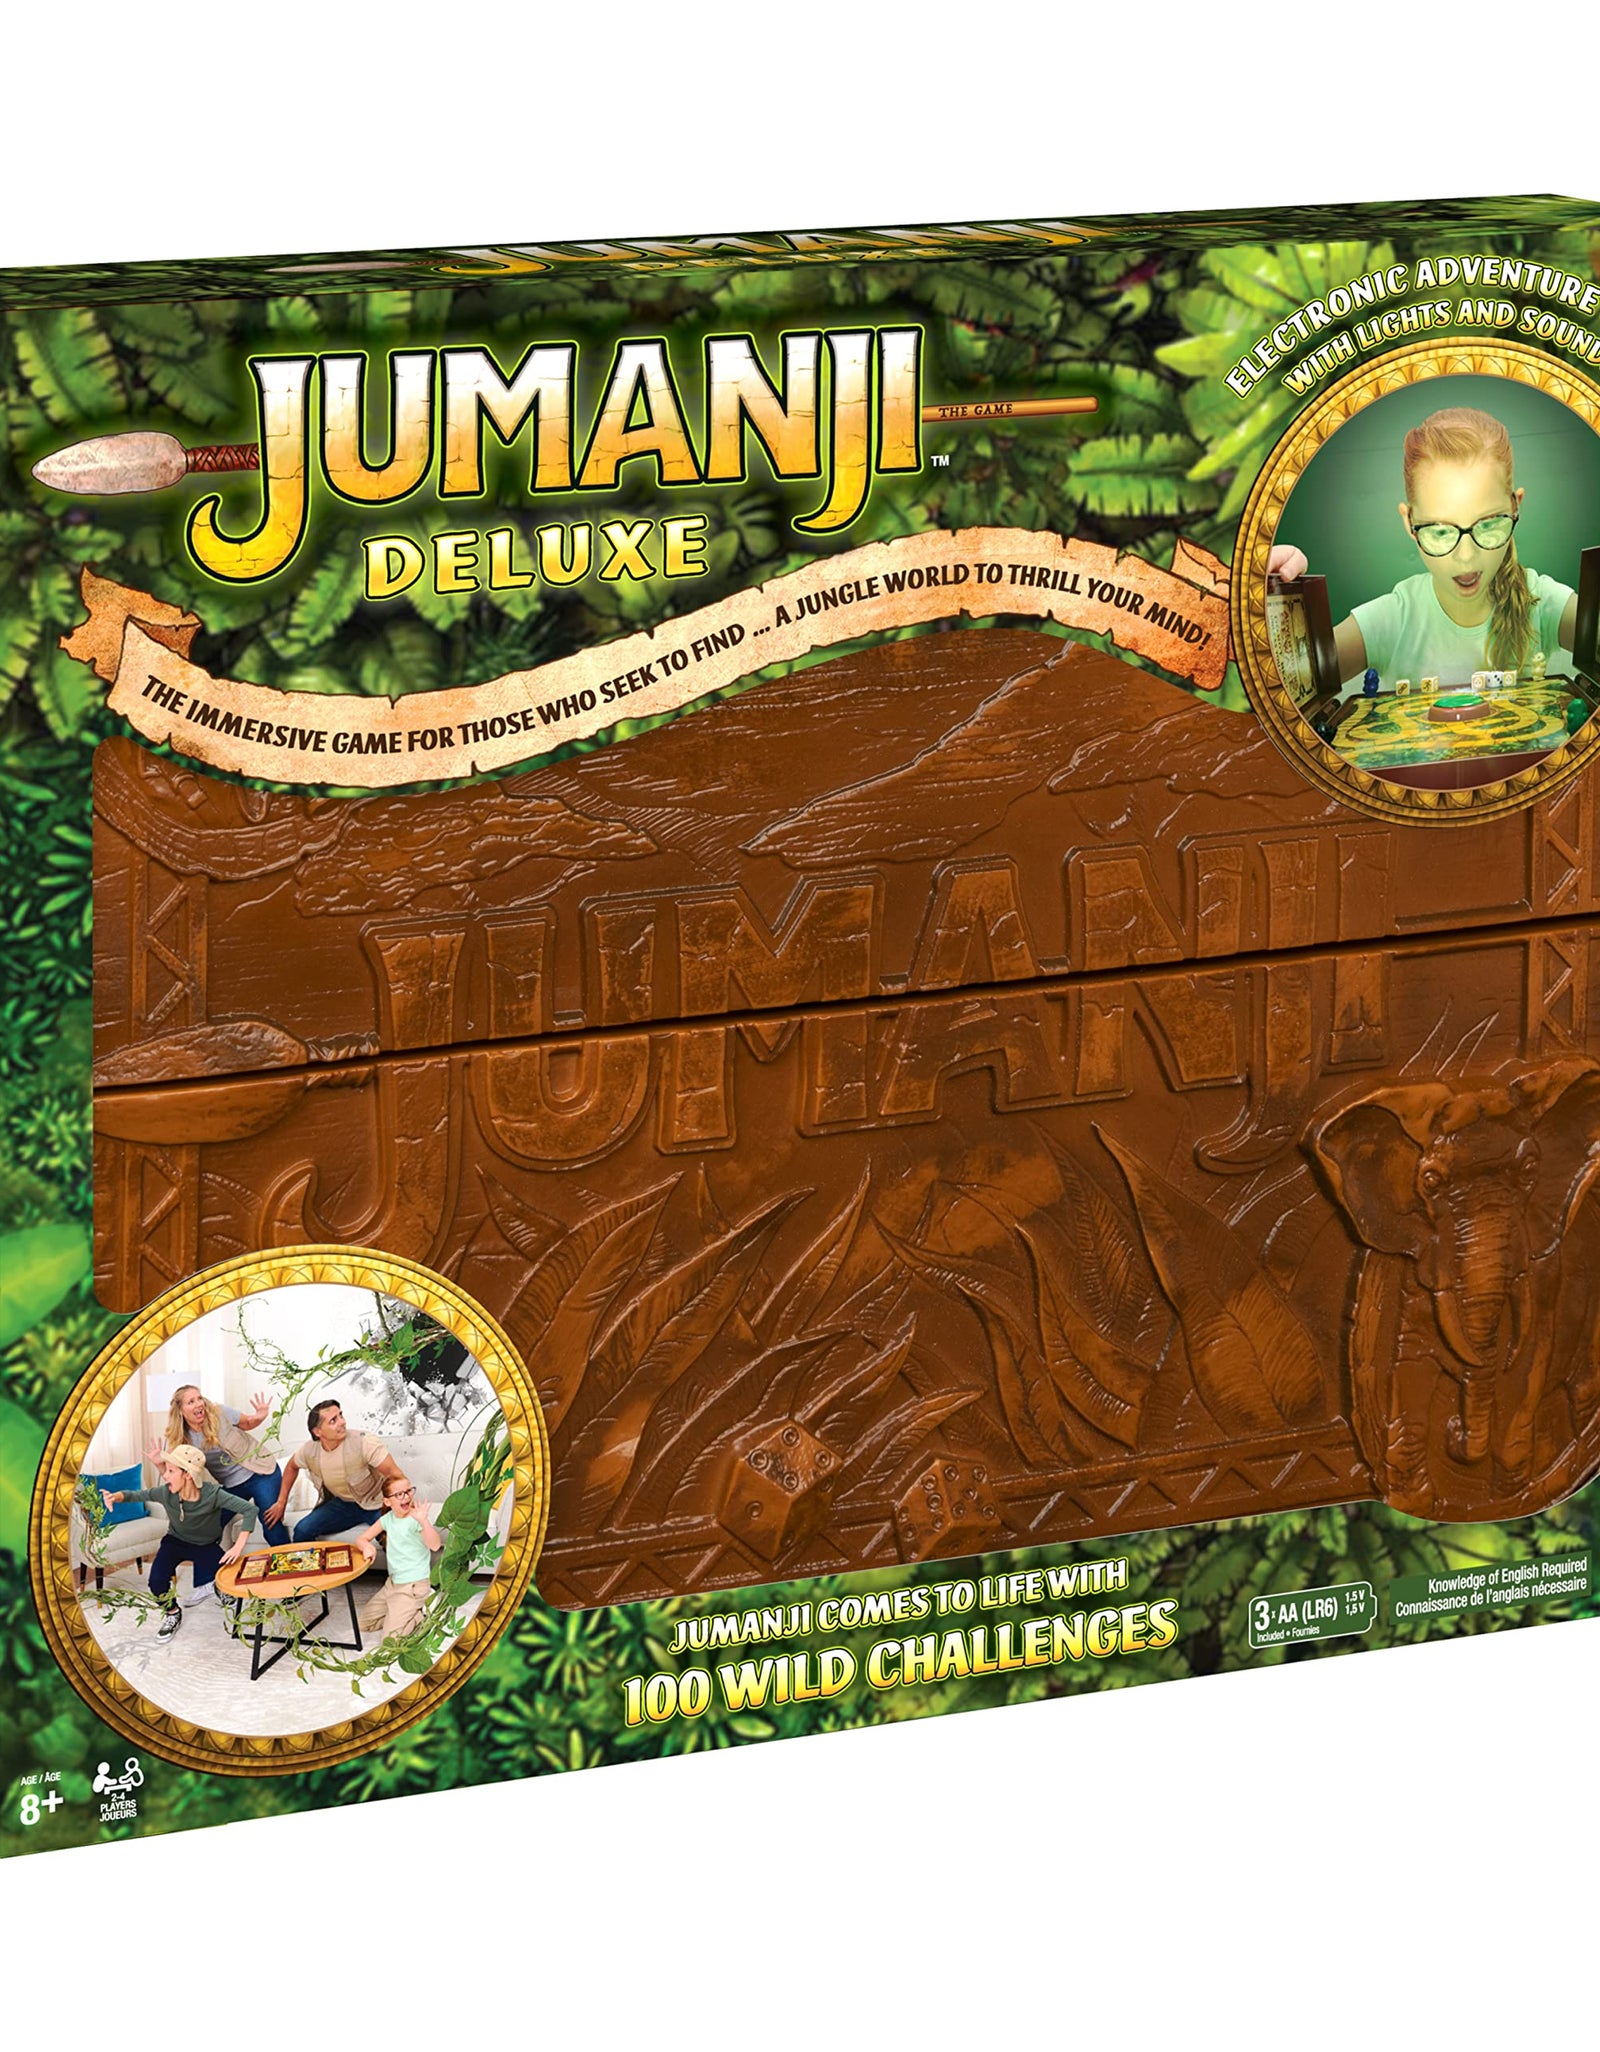 Jumanji Deluxe Game, Immersive Electronic Version of The Classic Adventure Movie Board Game, with Lights and Sounds, for Kids & Adults Ages 8 and up